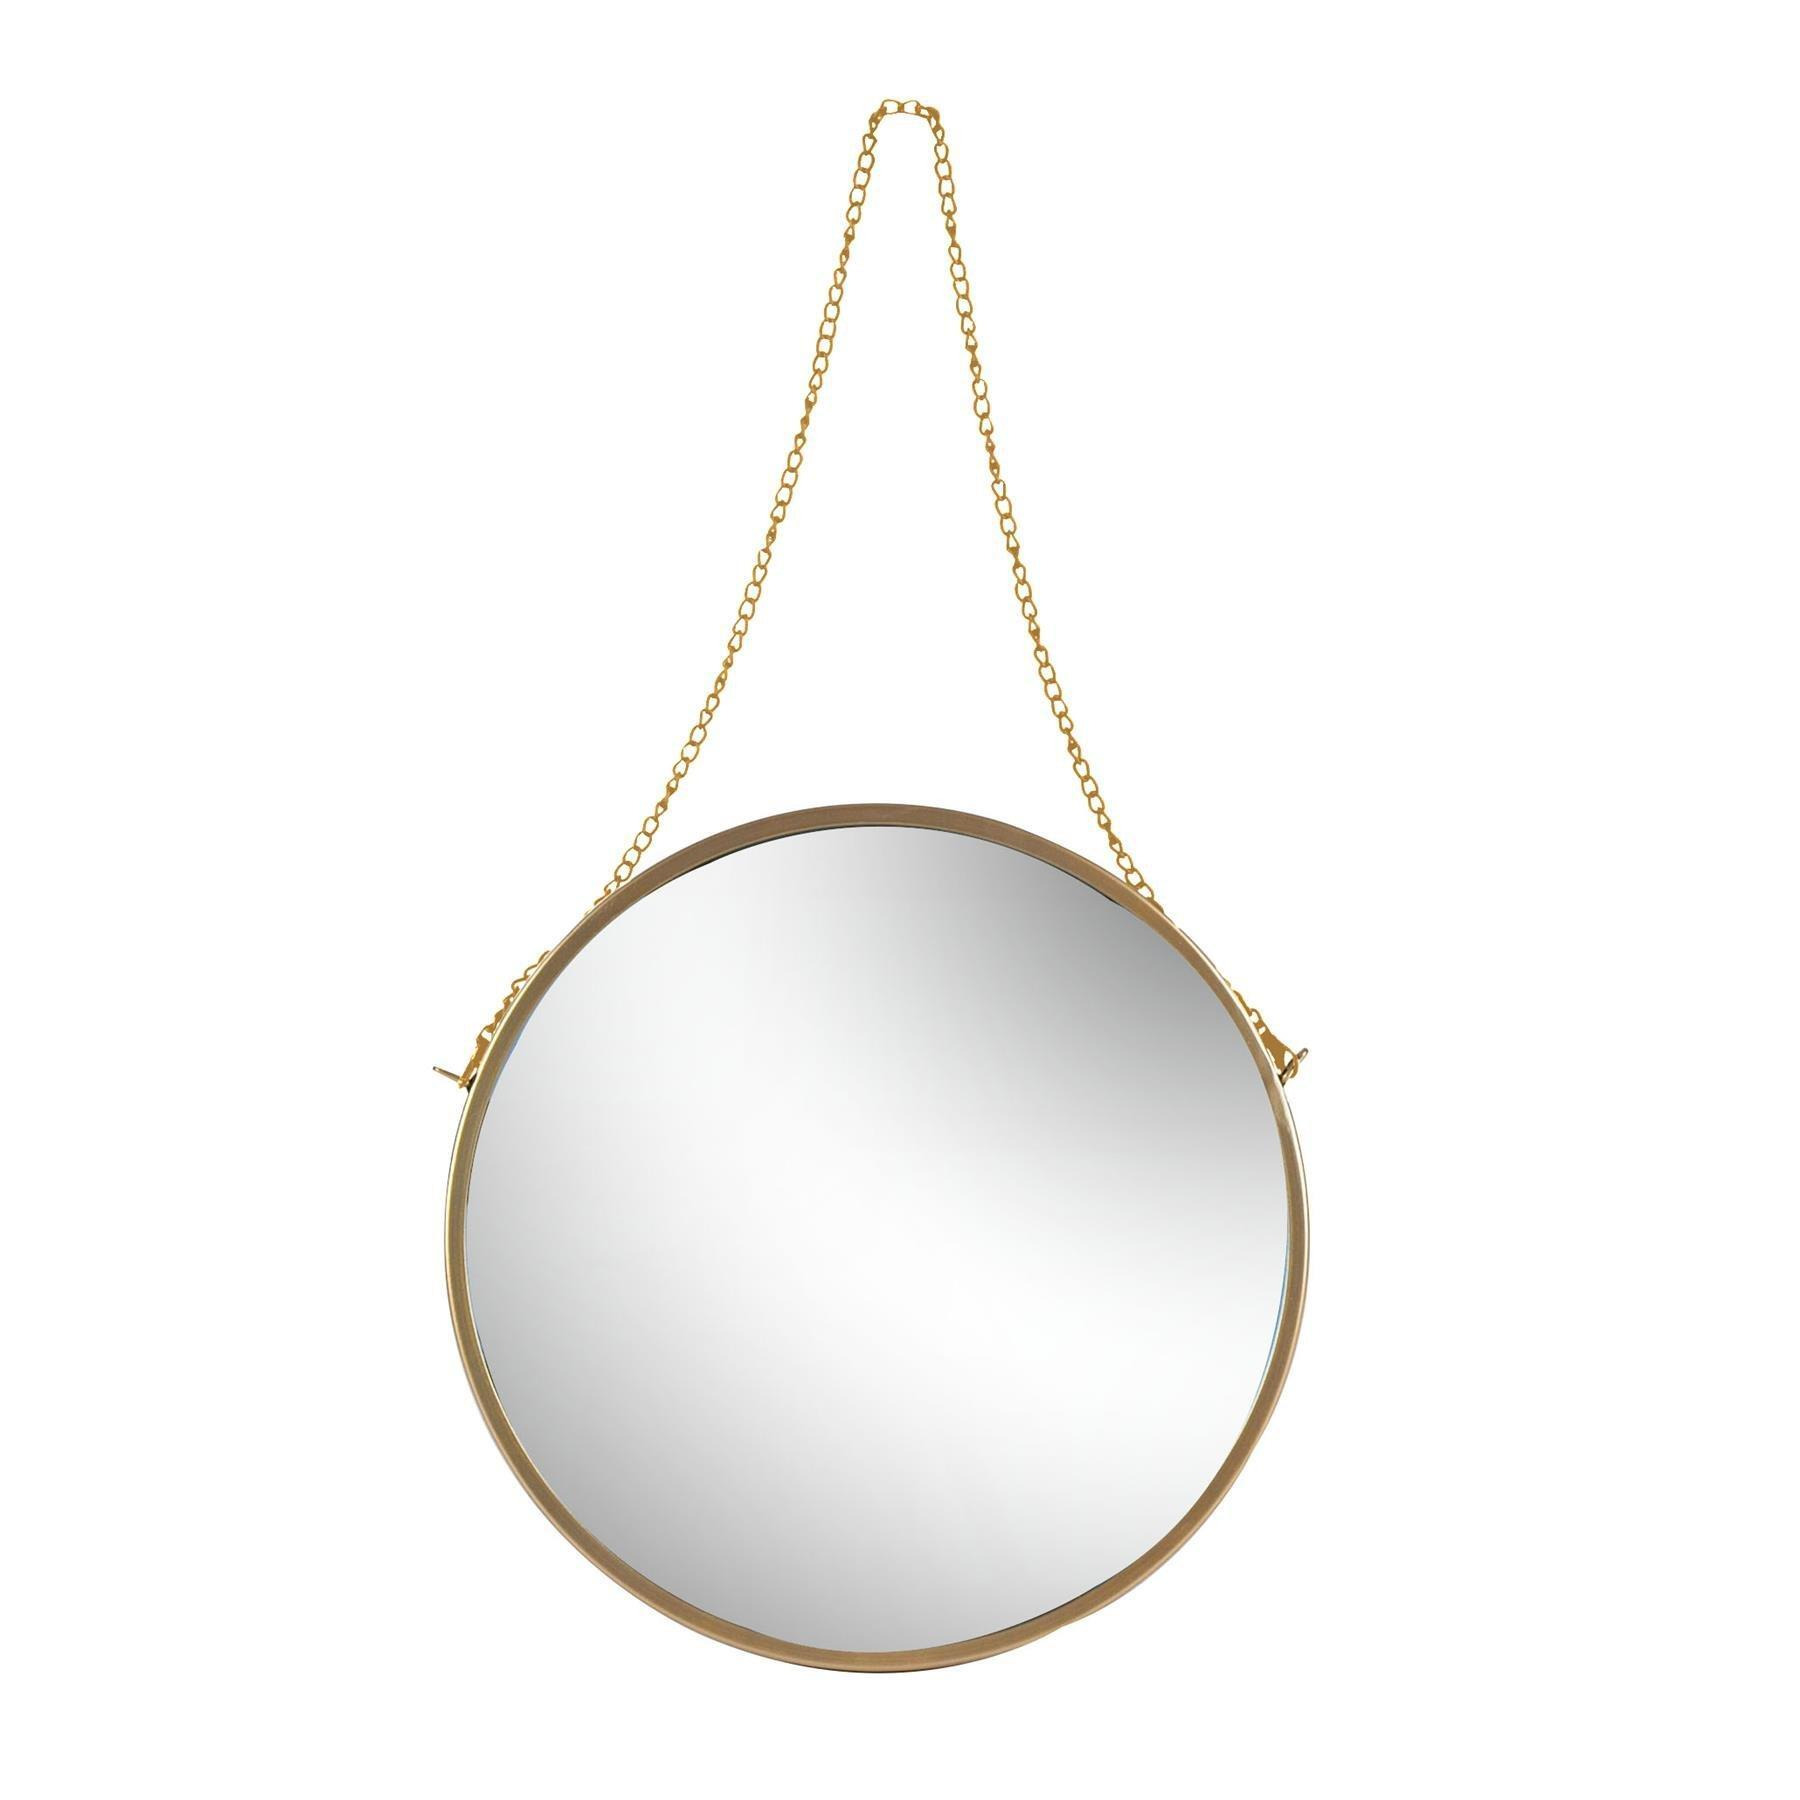 40cm Round Metal Frame Hanging Mirror on Chain Gold/Gold - image 1